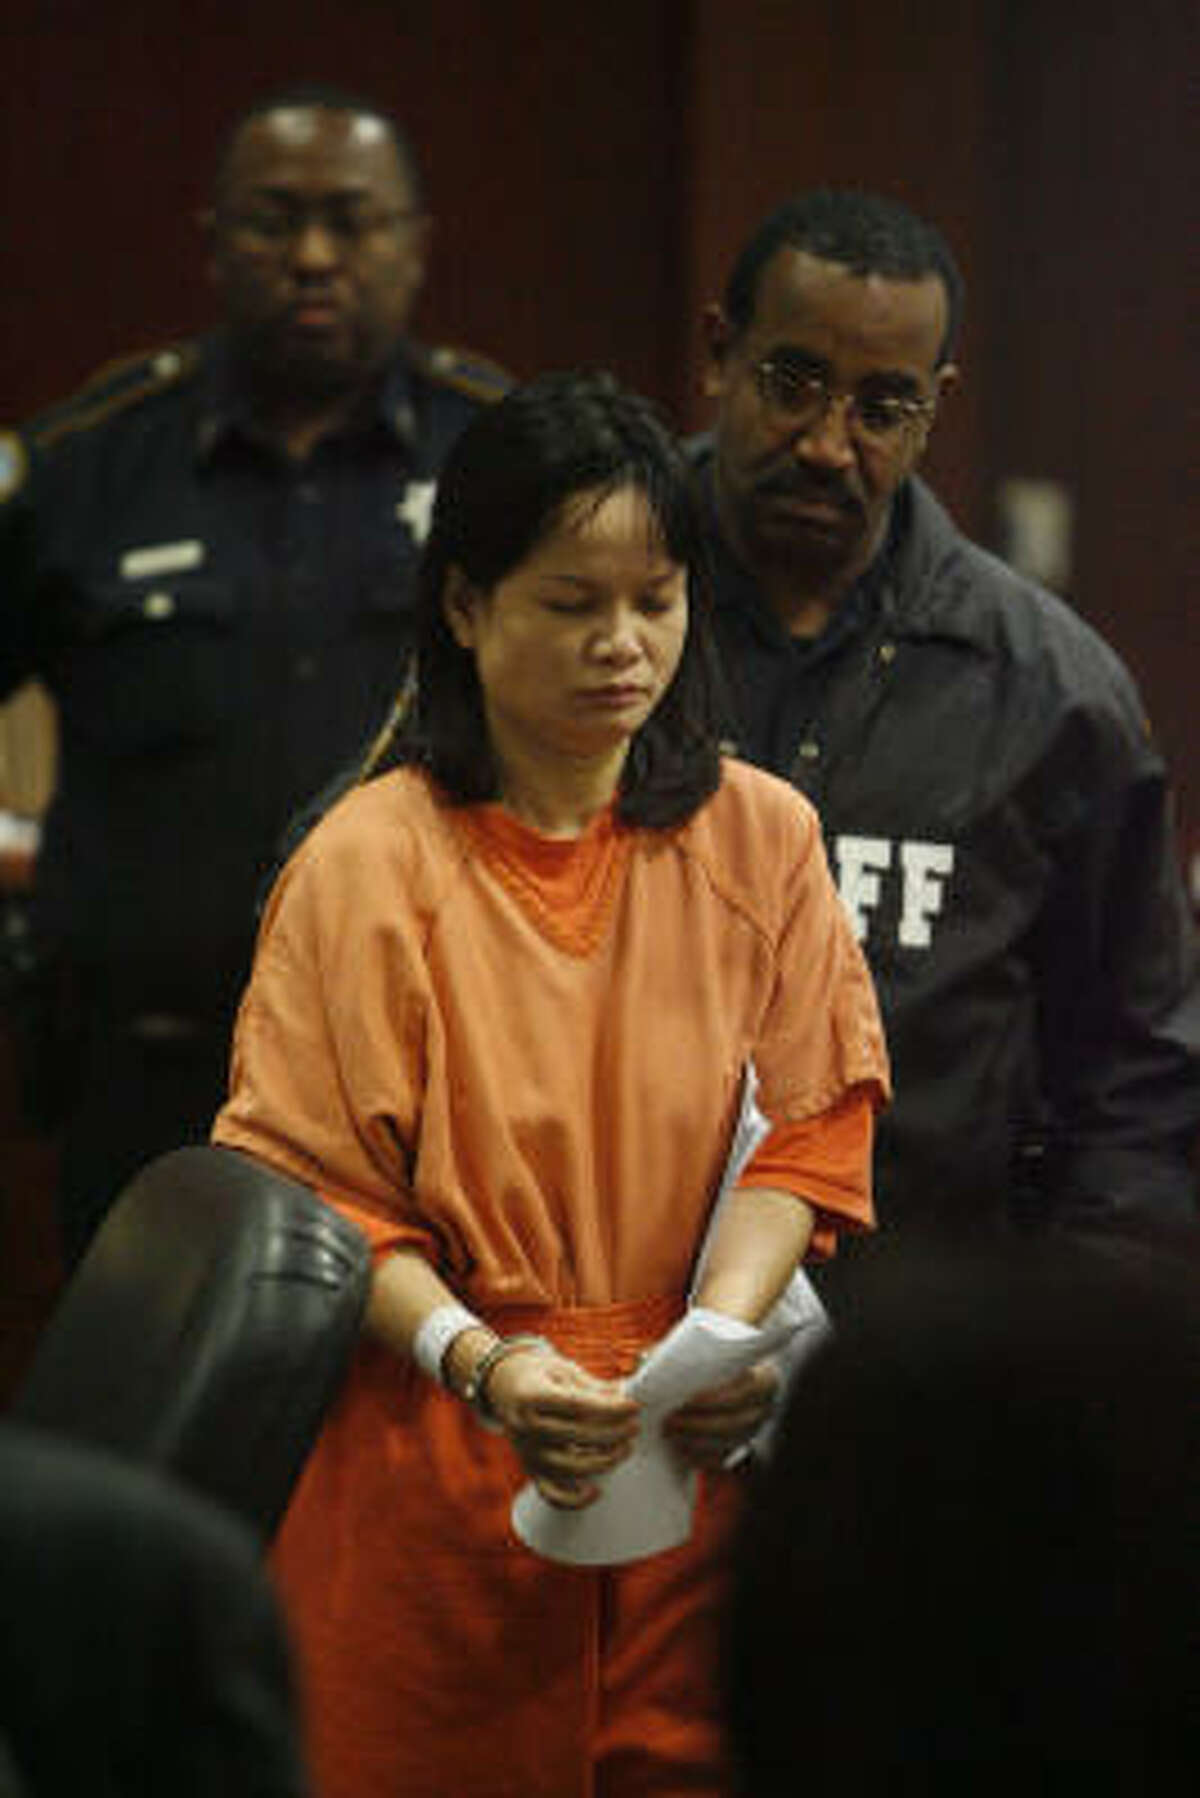 Phung Tran, the boy’s mother, was implicated by his 6-year-old sister.